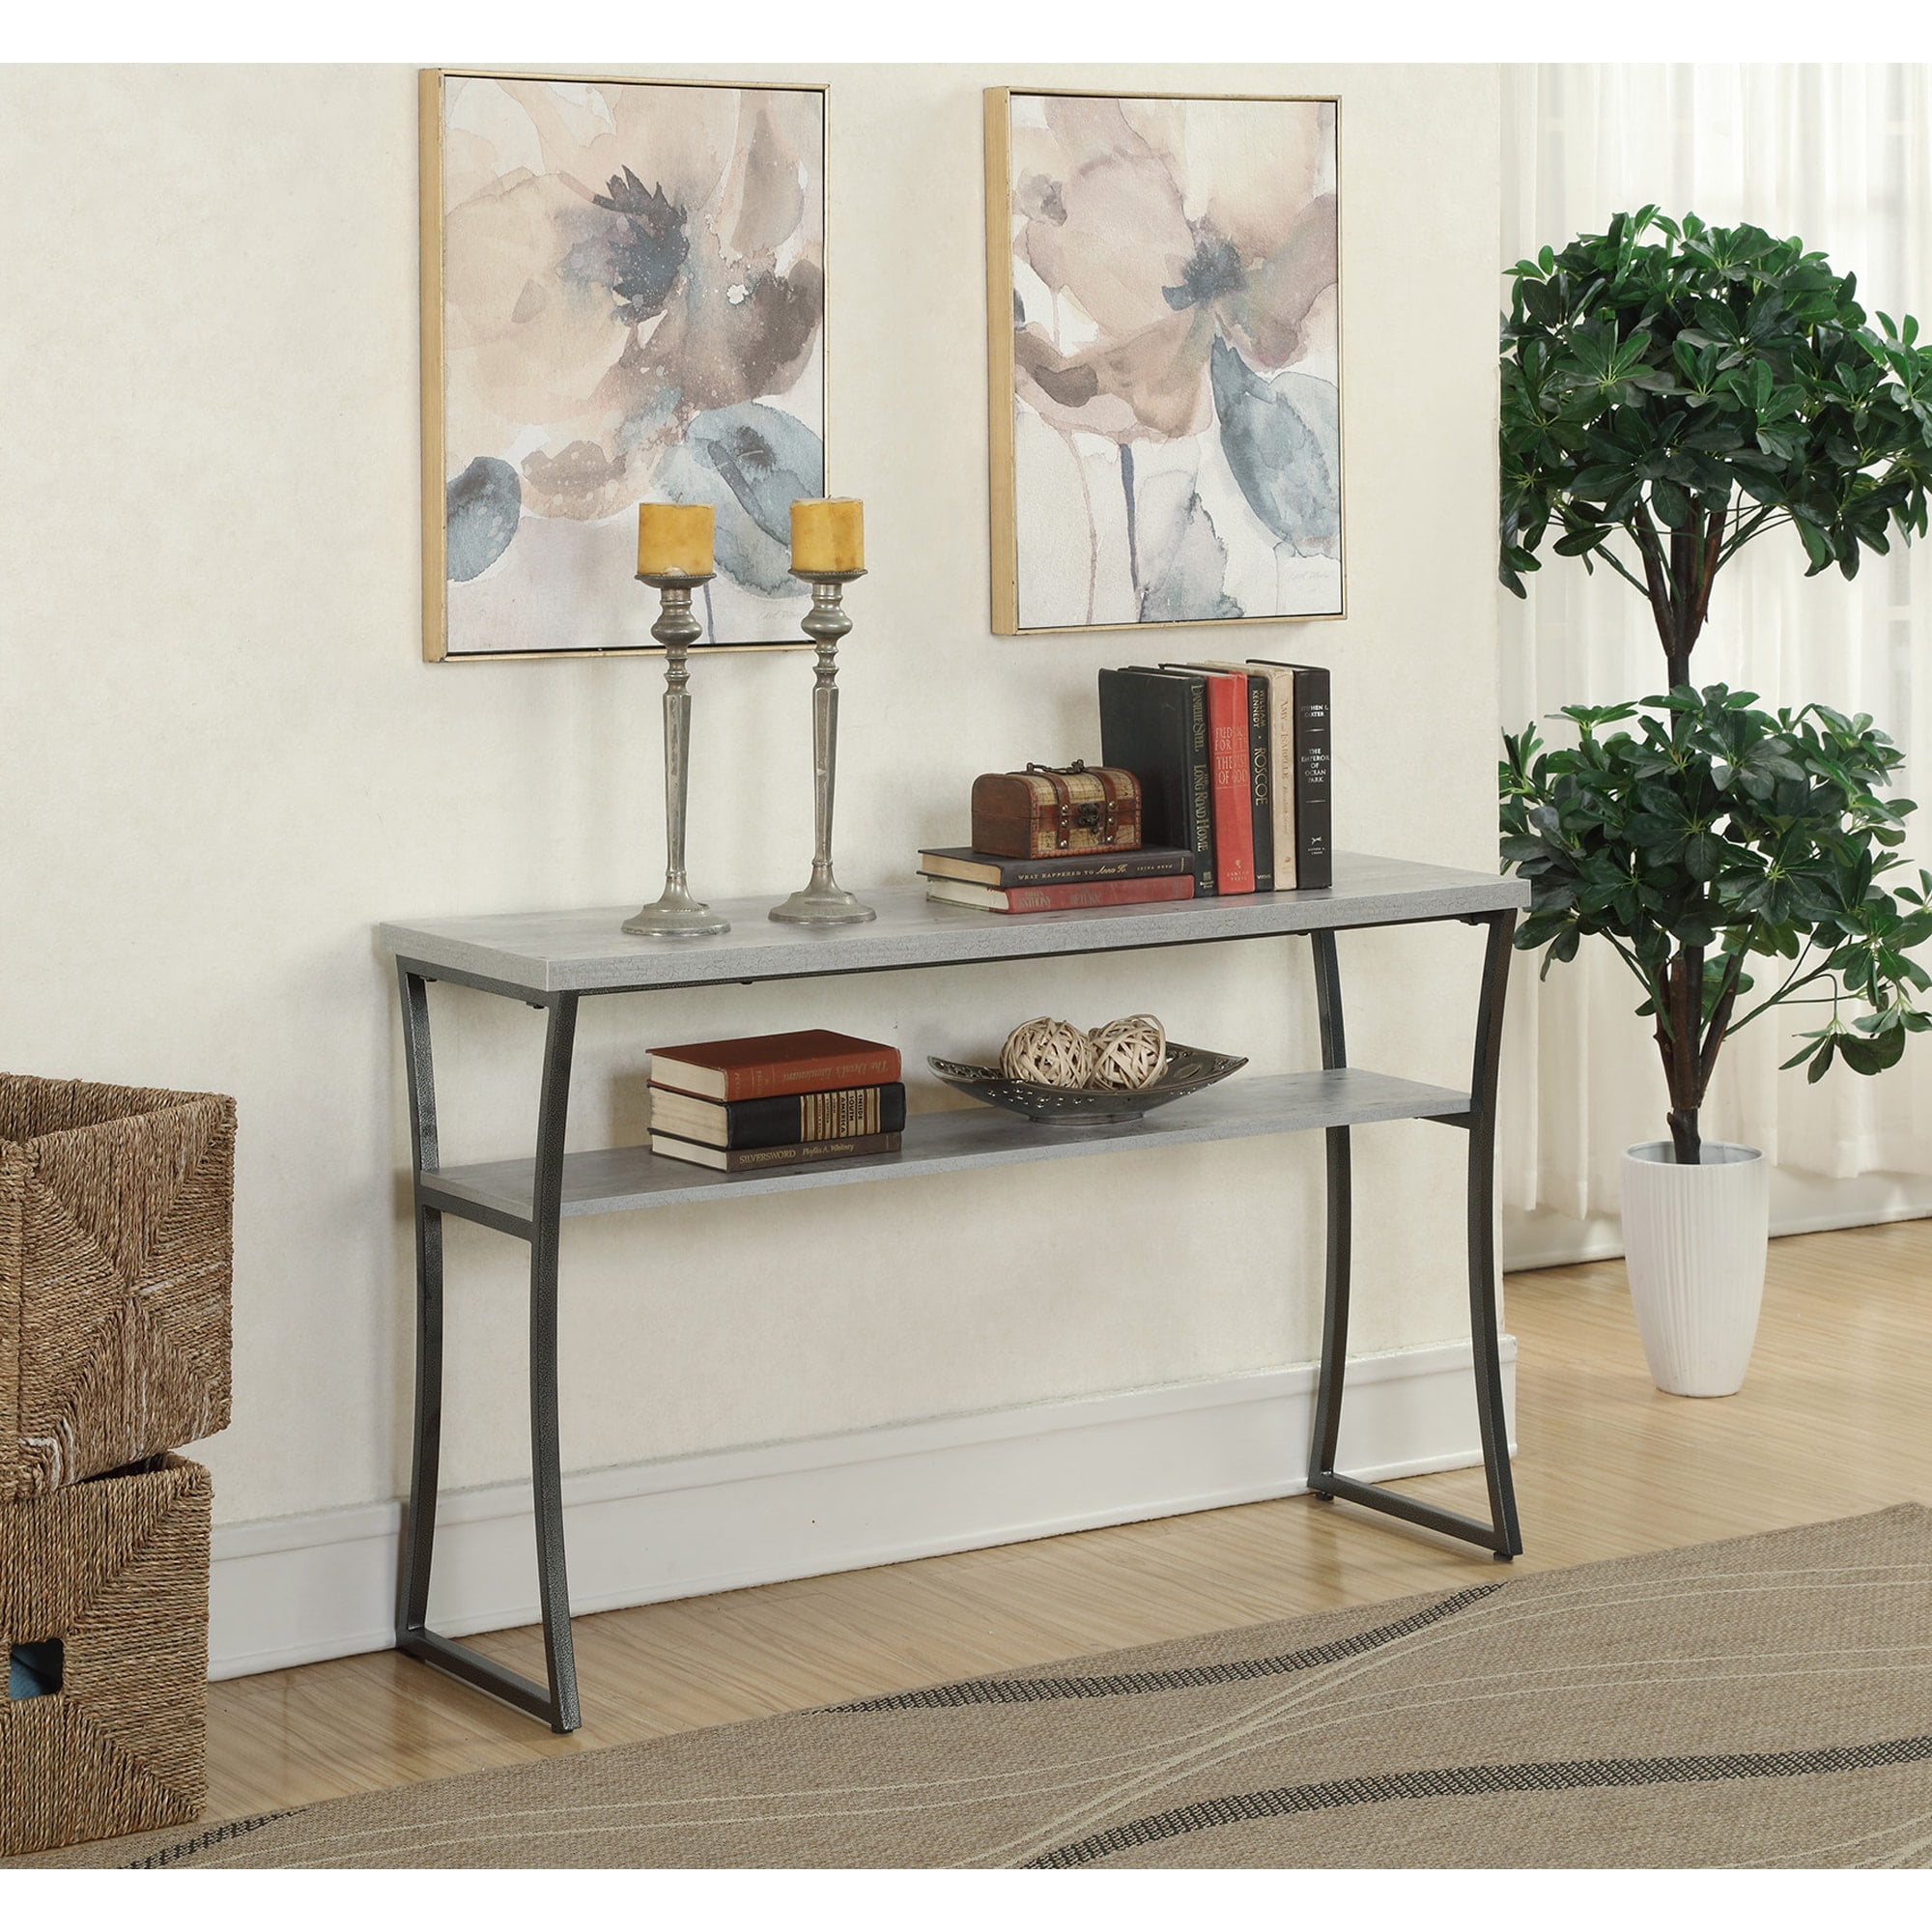 111599gy Console Table, Faux Birch - 47.25 X 13.75 X 29.5 In.